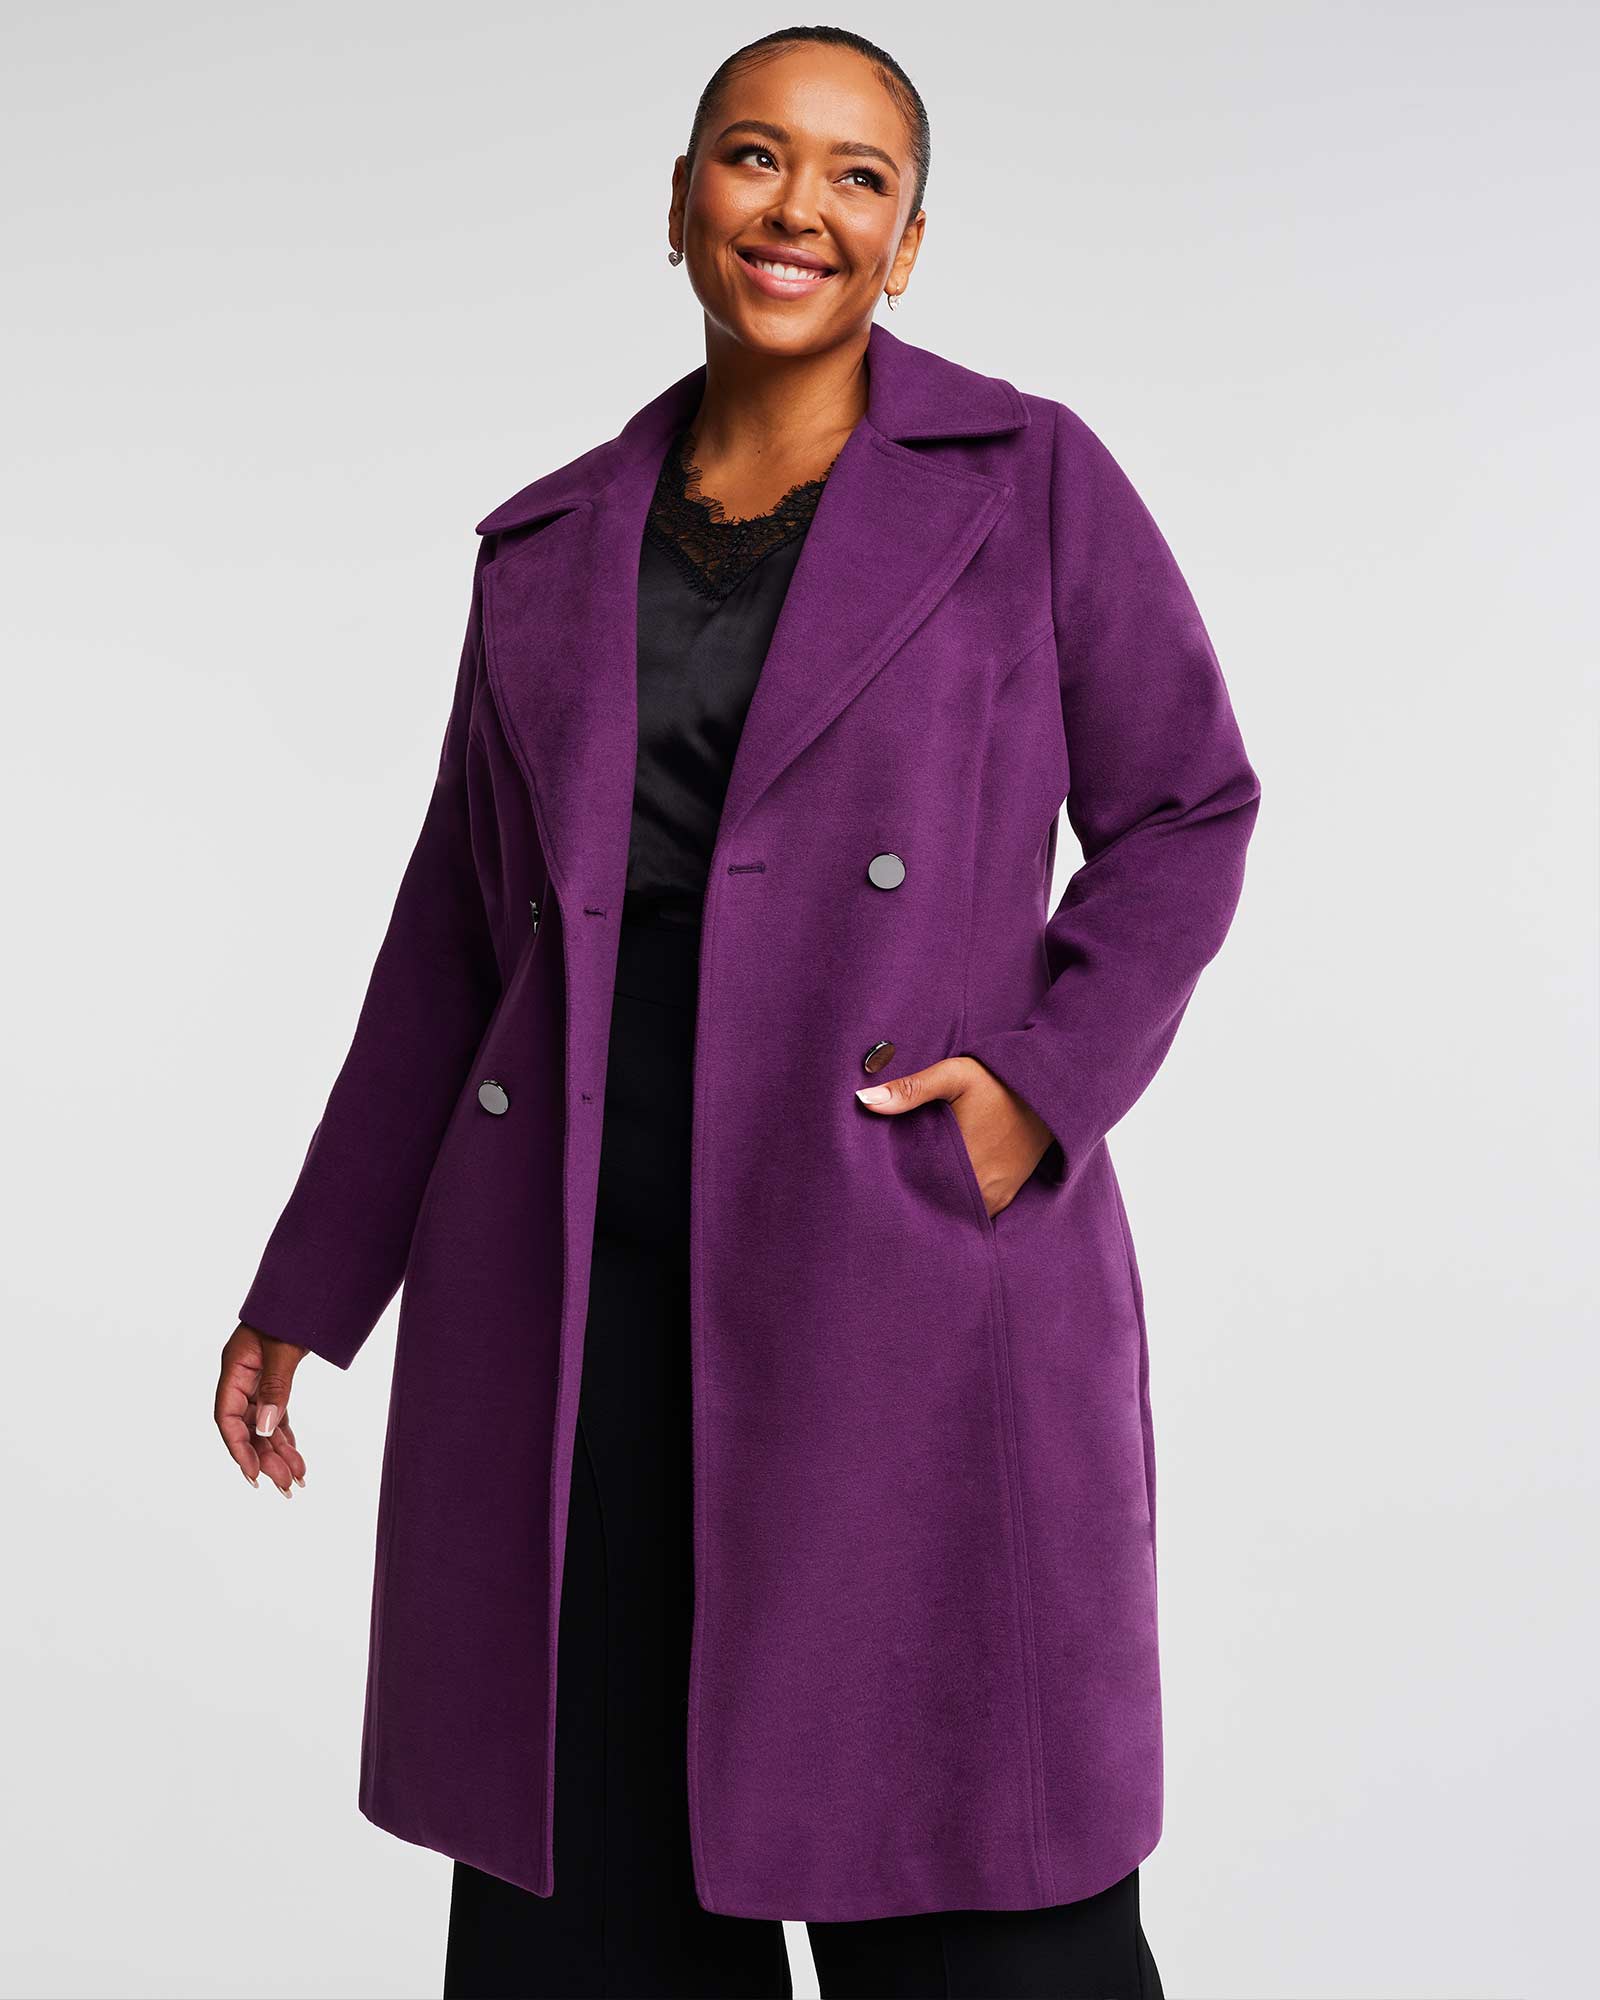 A woman wearing the Estelle Violet Sky Double Breasted Coat and black pants.